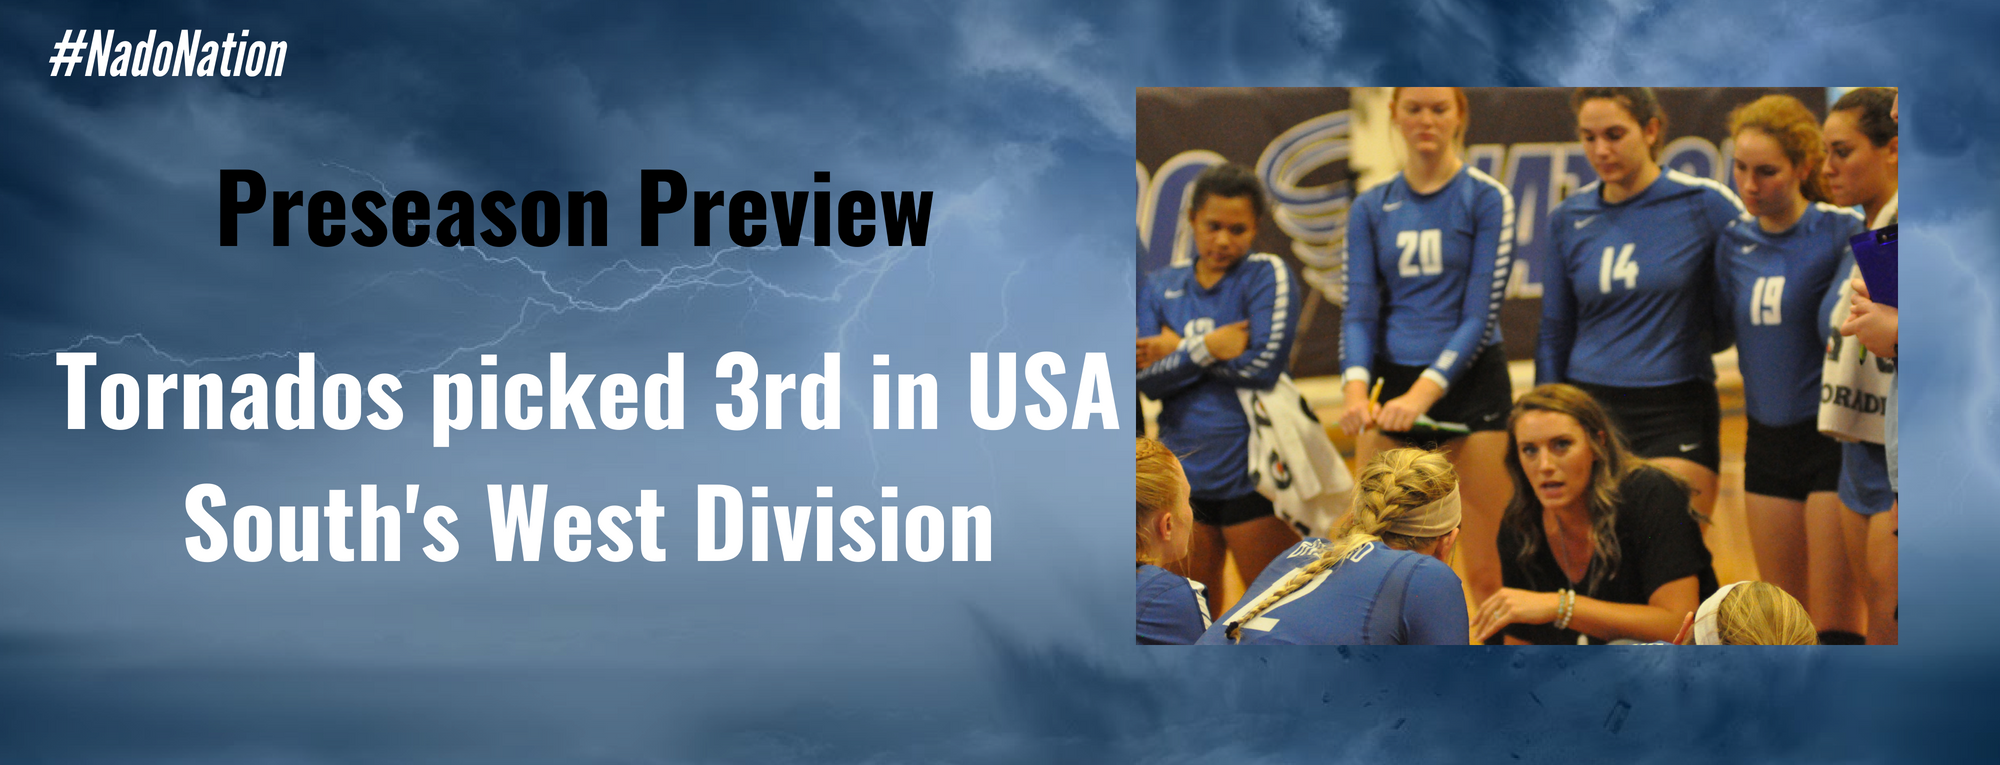 Volleyball Preseason Preview: Tornados picked 3rd in USA South’s West Division